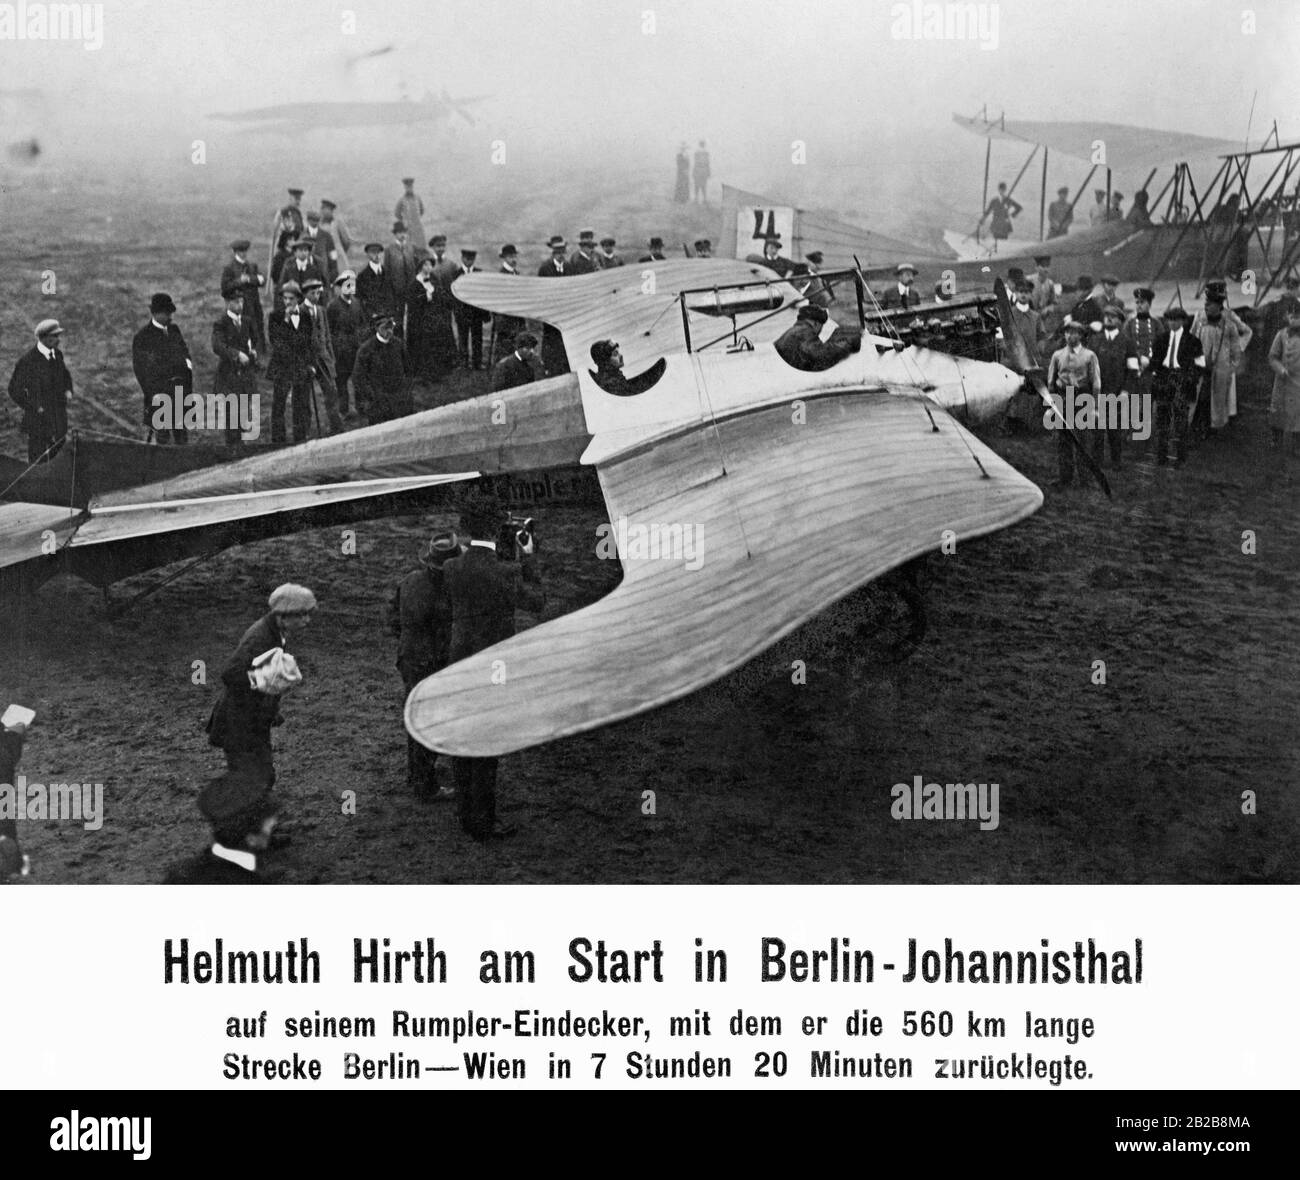 The pilot Helmut Hirth on the Johannisthal airfield near Berlin. He covered the distance Berlin - Vienna in 7 hours, 20 minutes with this plane. Stock Photo